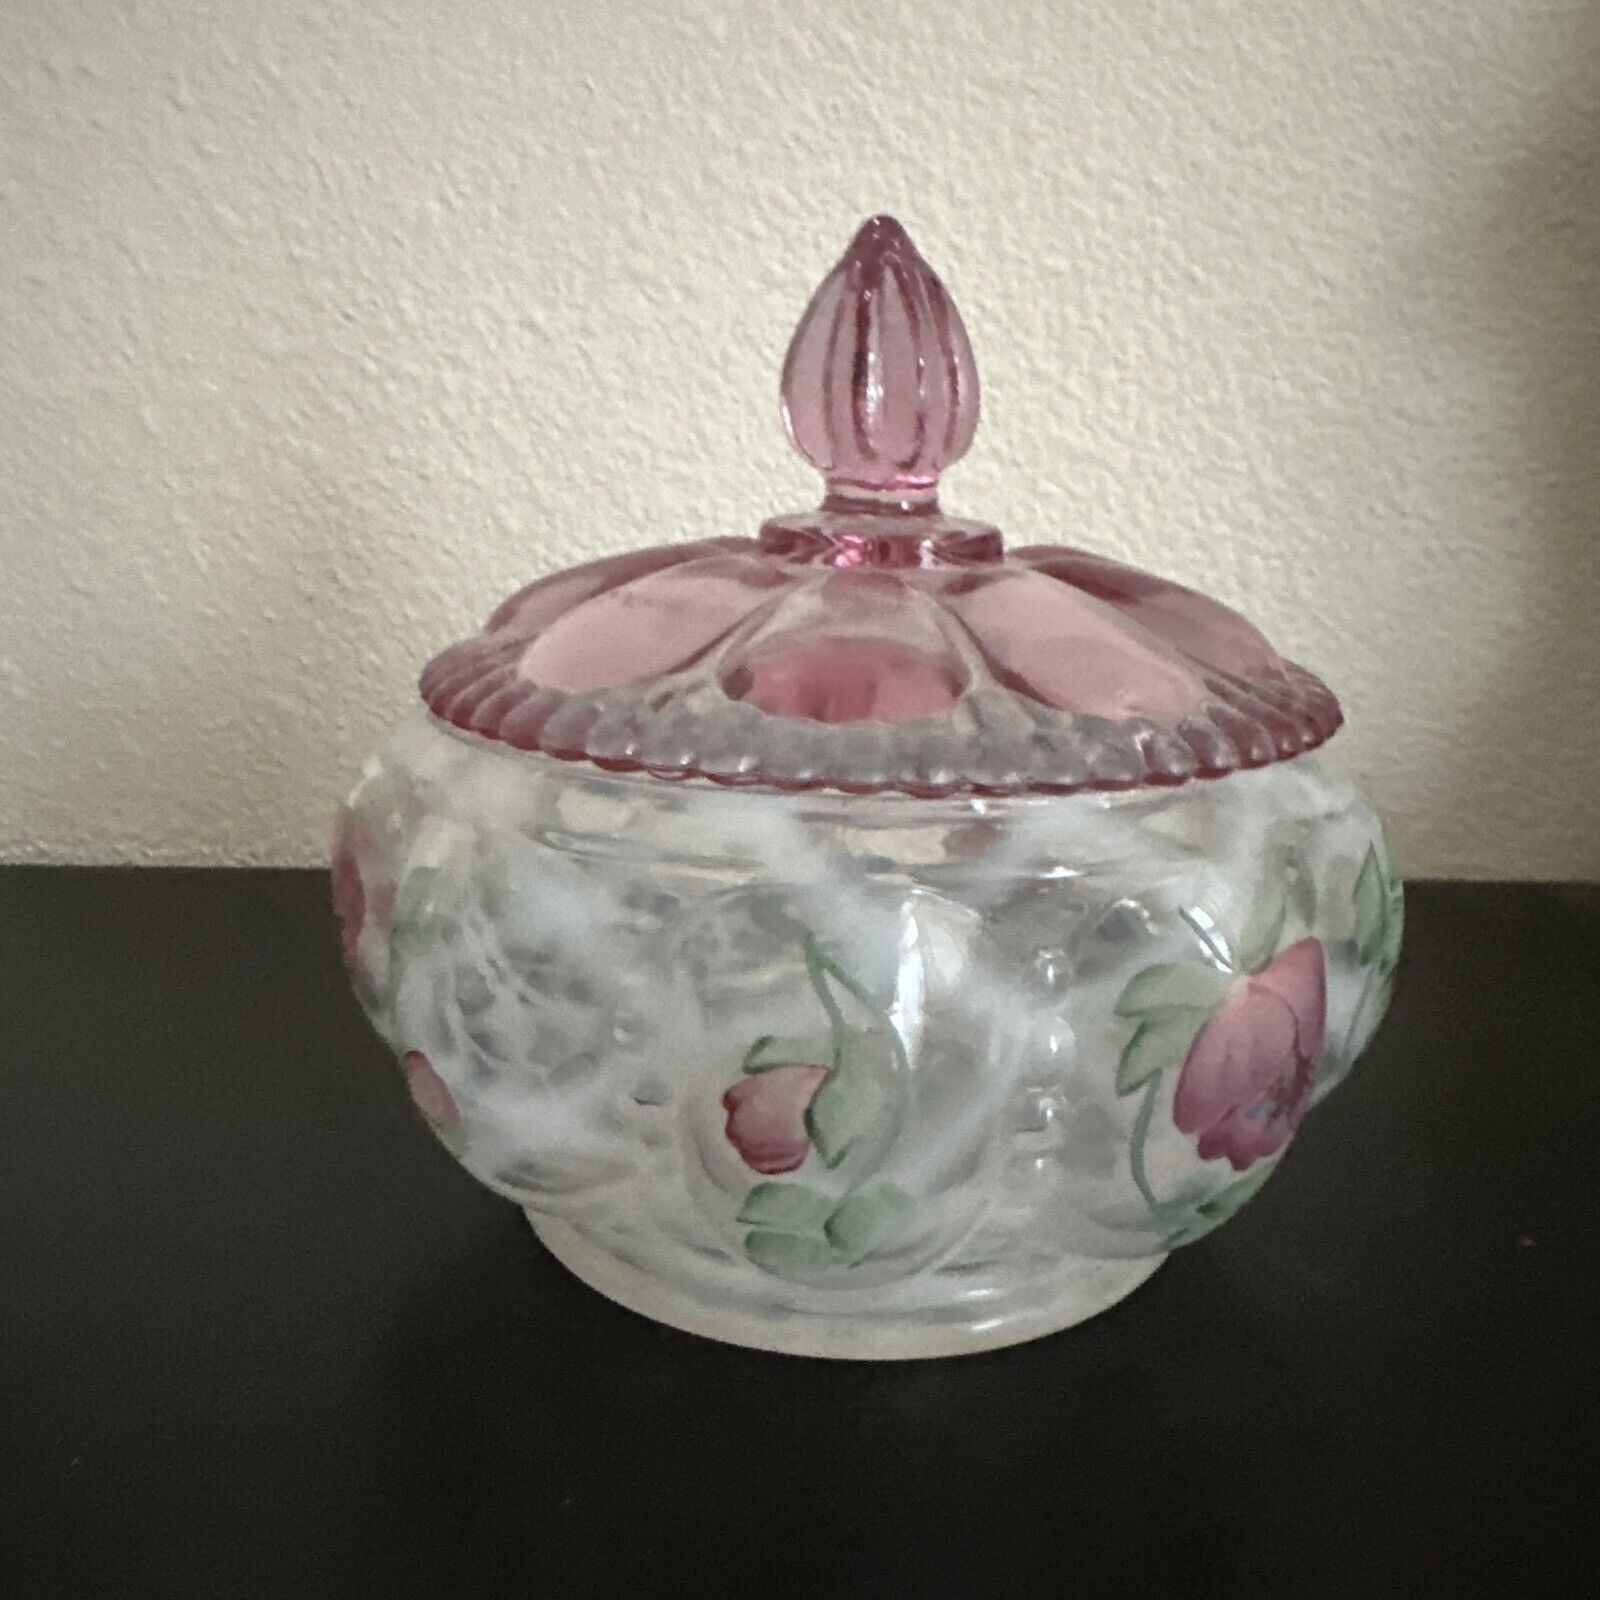 Fenton Large Painted Trellis Melon Powder Box or Candy Jar with Lid